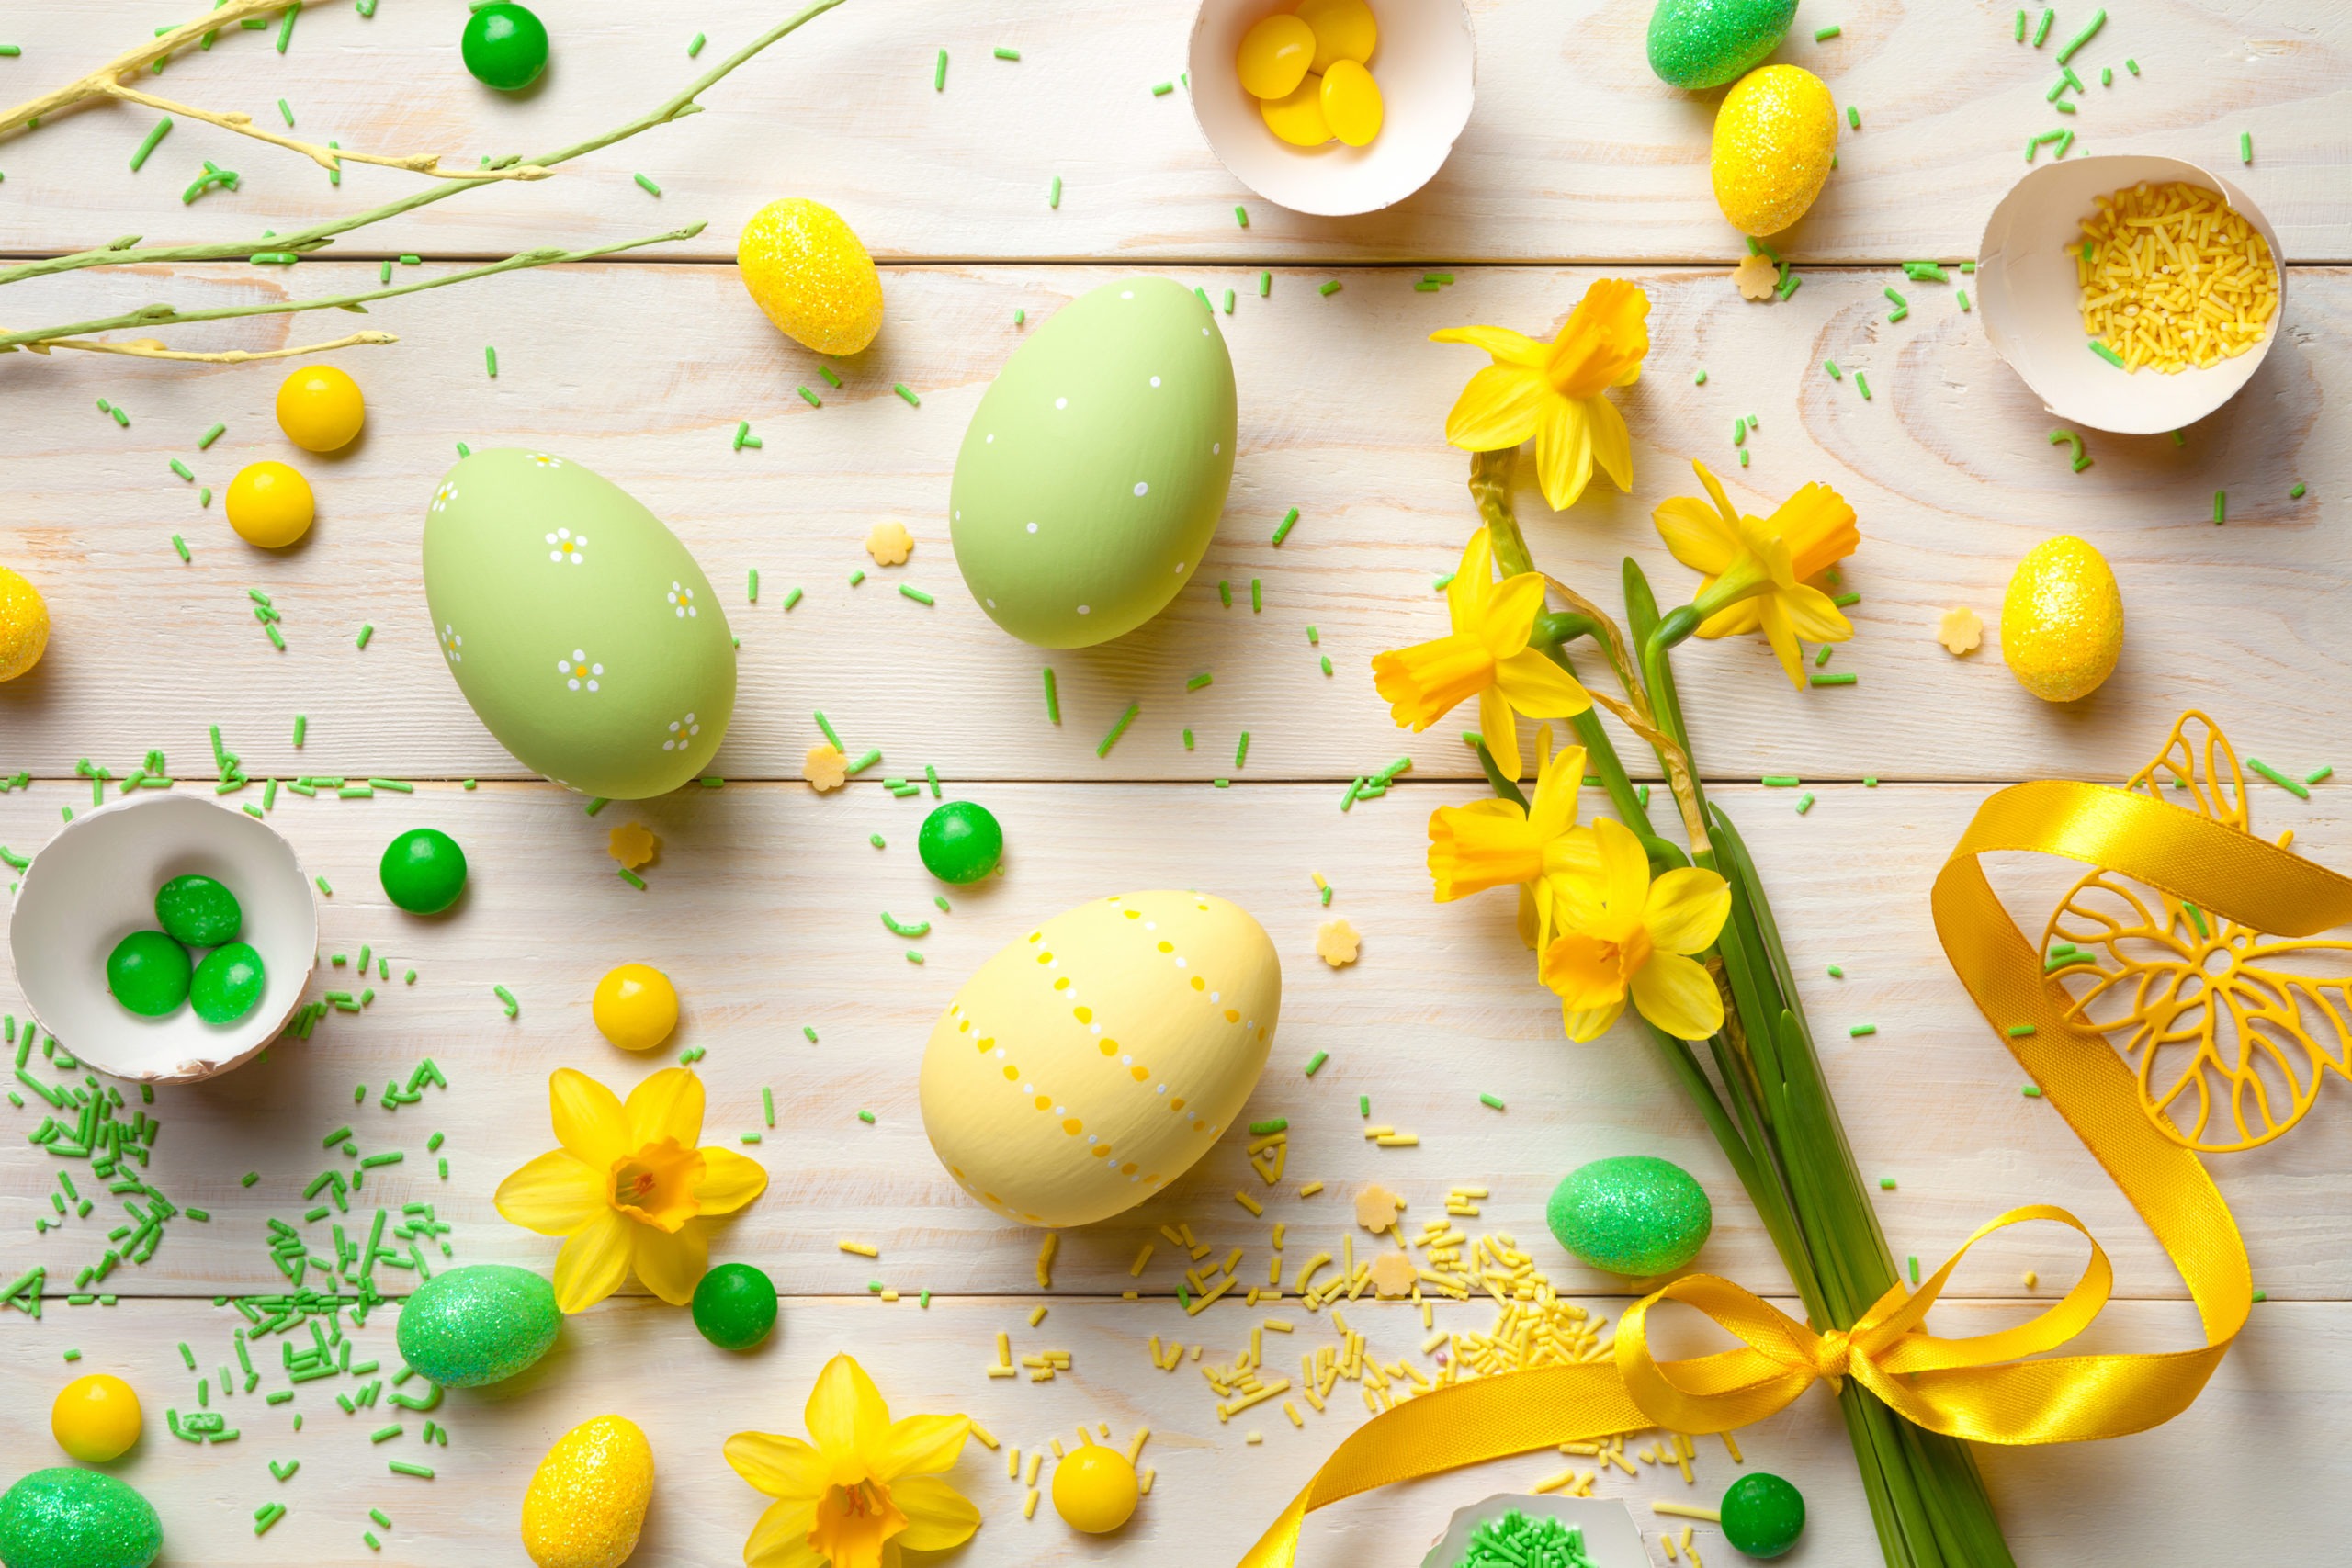 8 Simple Ways To Save Money This Easter